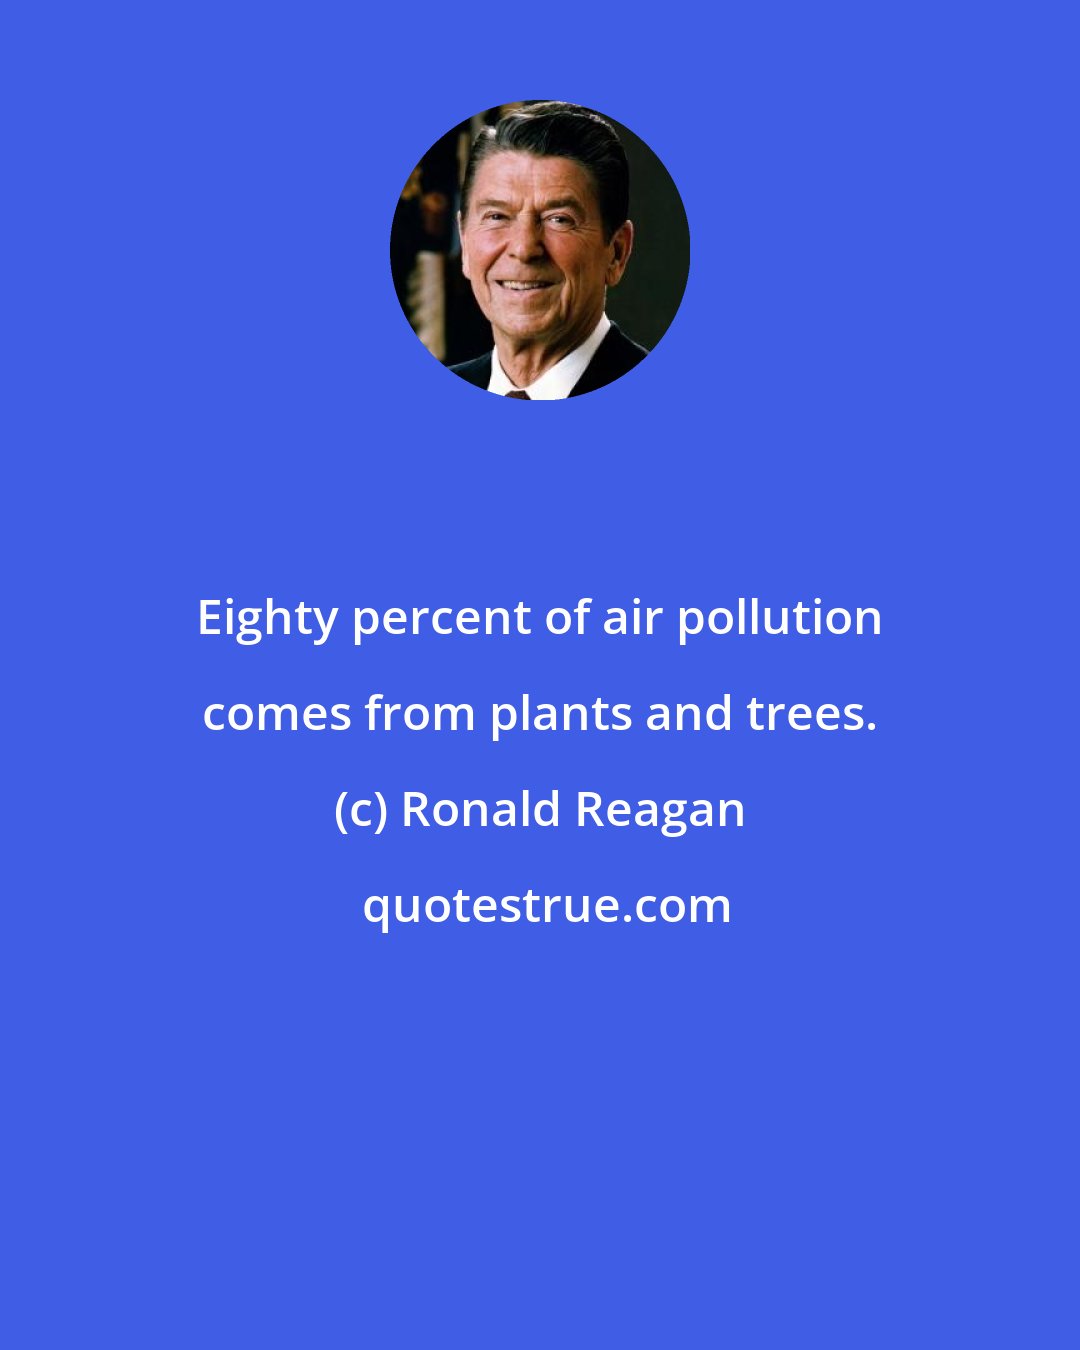 Ronald Reagan: Eighty percent of air pollution comes from plants and trees.